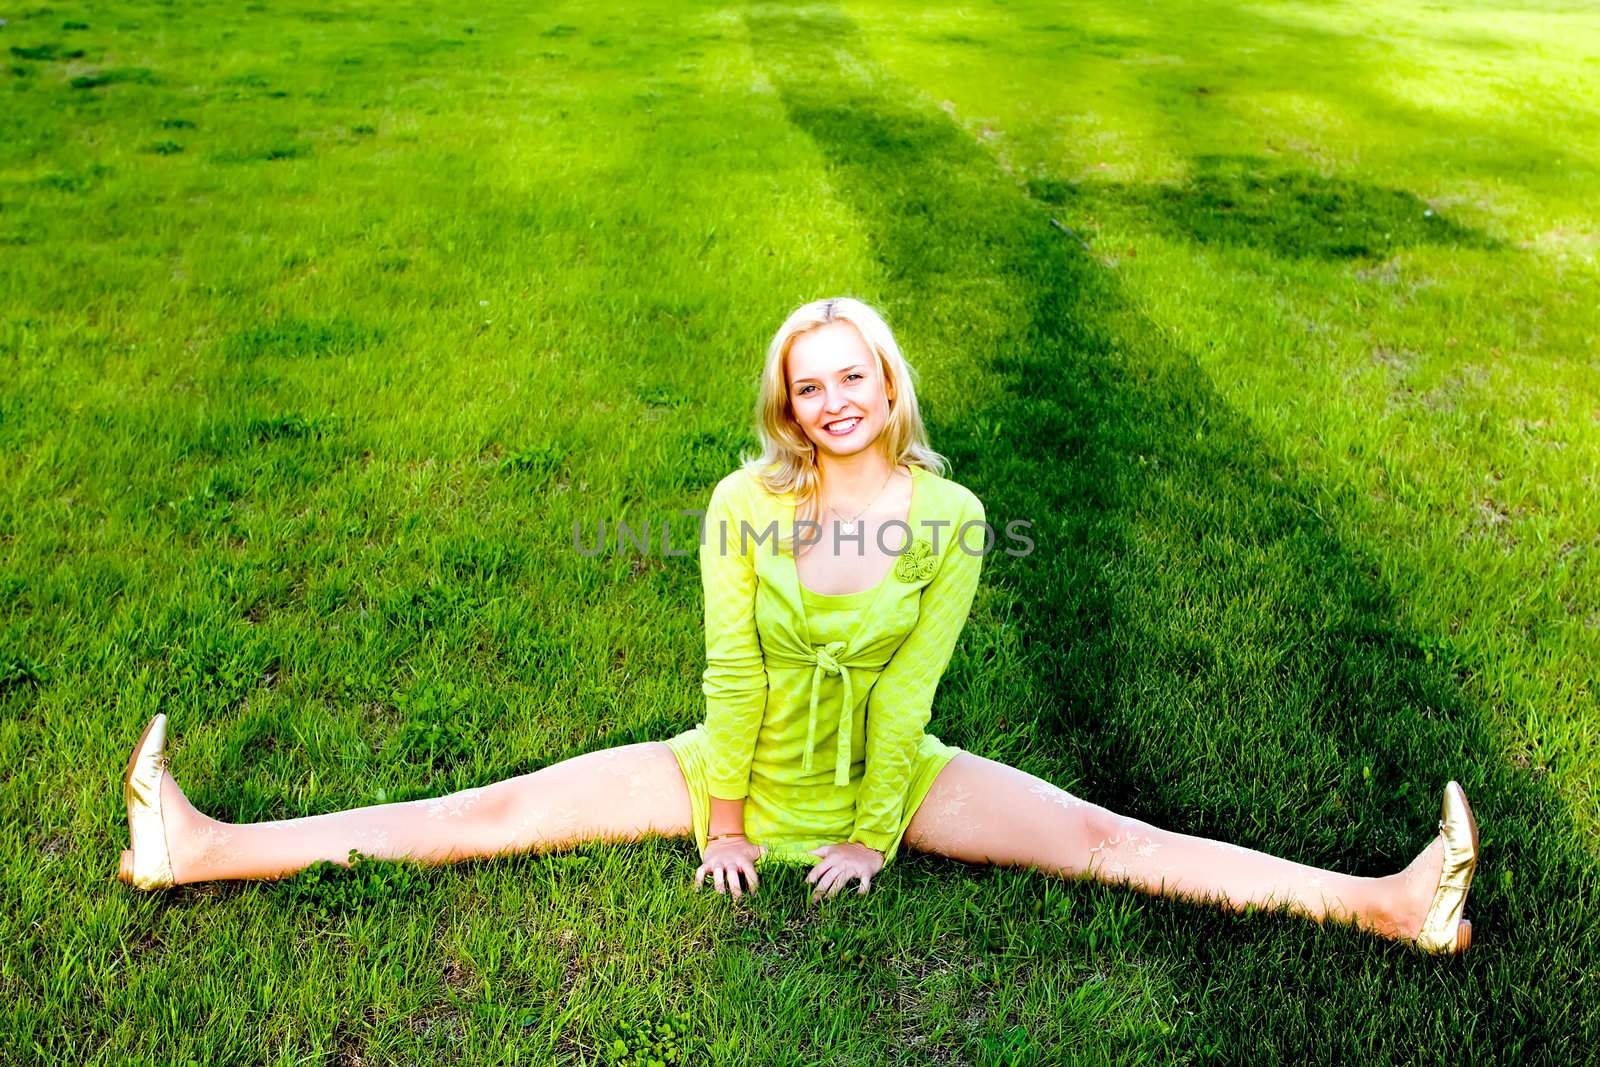 The young girl carrying out gymnastic exercise on a grass